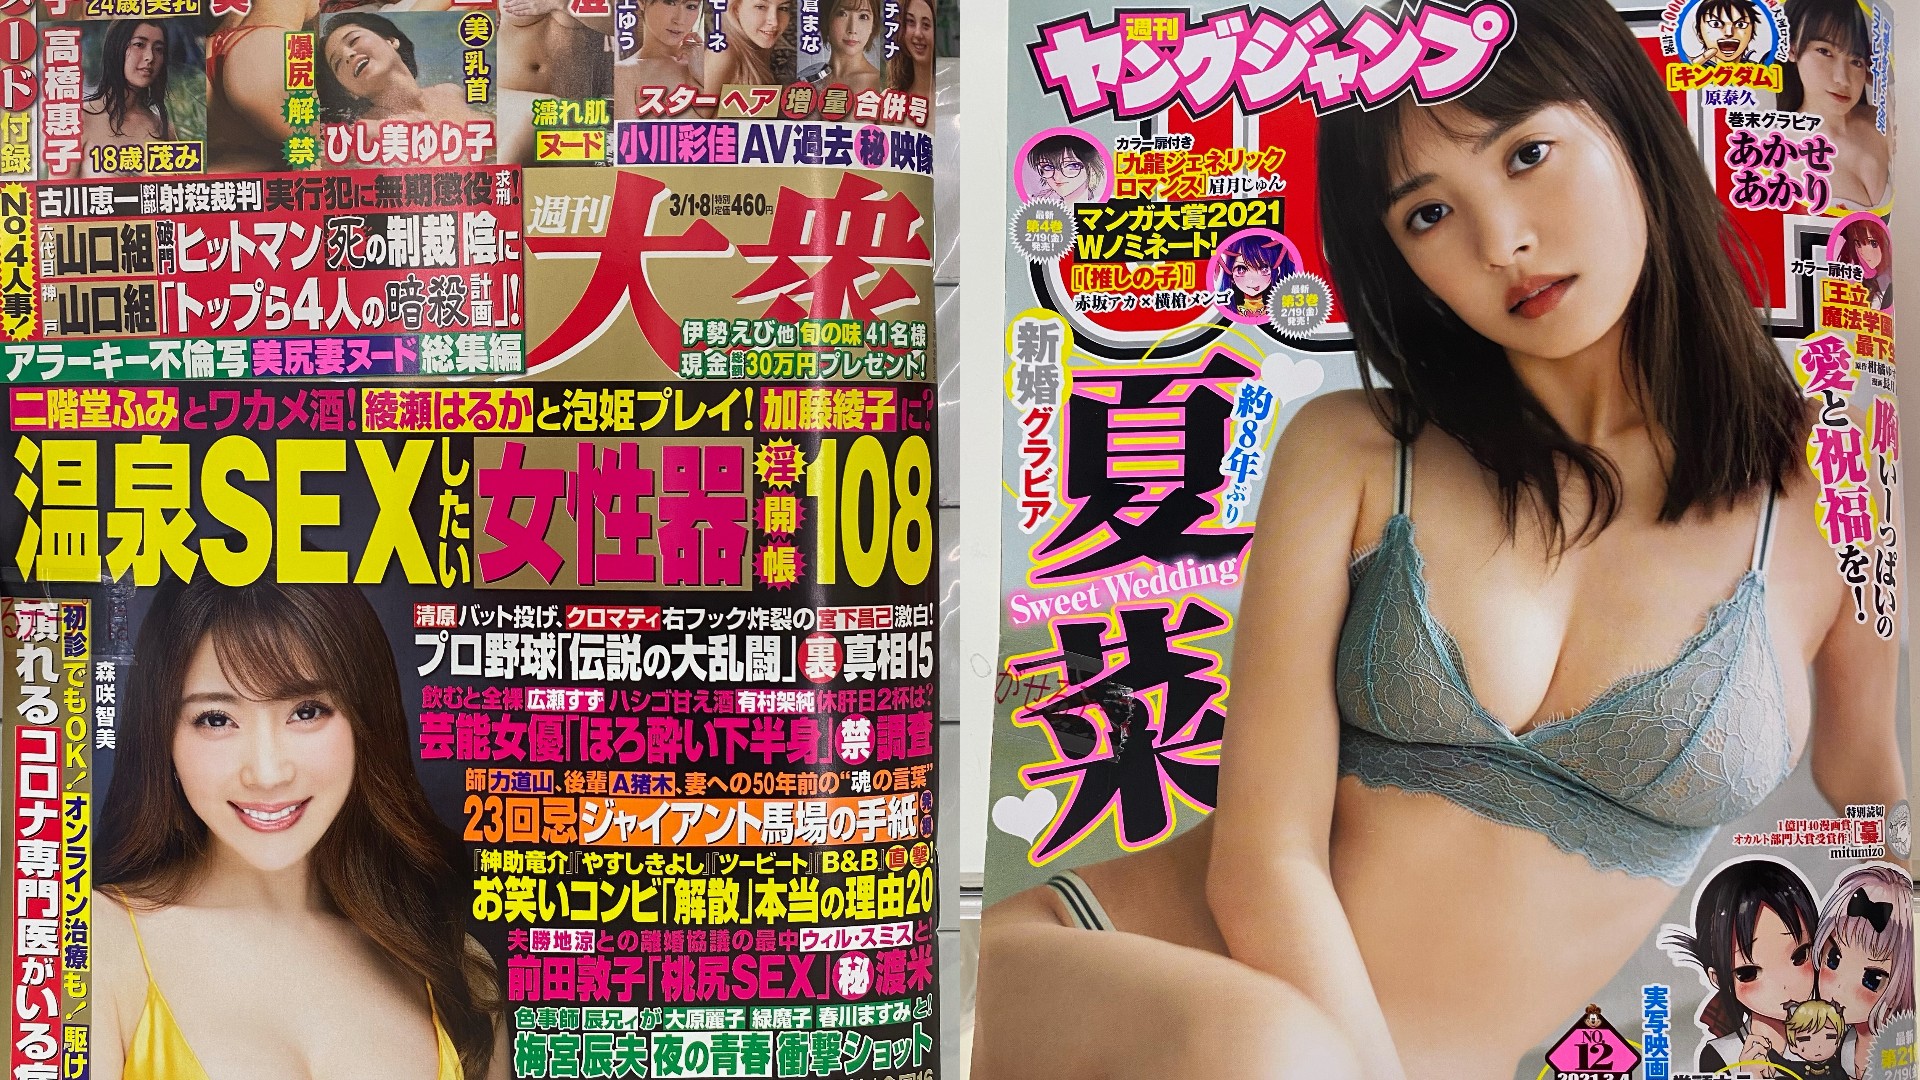 Old Japanese Porn Magazine - Who Buys Porn Magazines Anymore? We Asked the Editor of One.